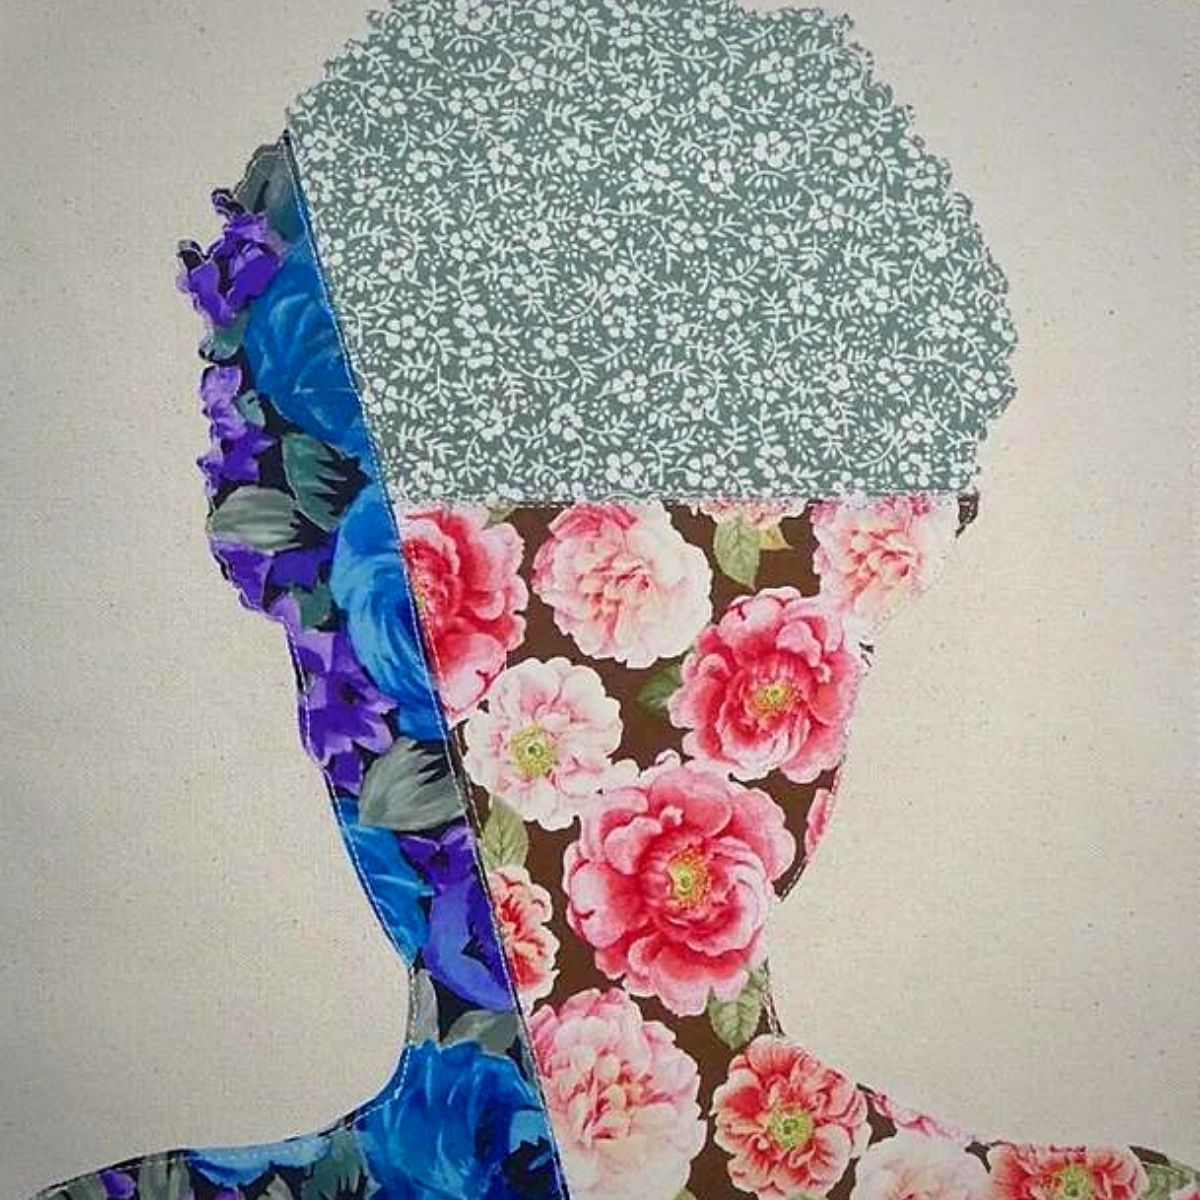 Gio Swaby Explores Resilience in Adversity Through Her ‘I Will Blossom Anyway’ Artworks